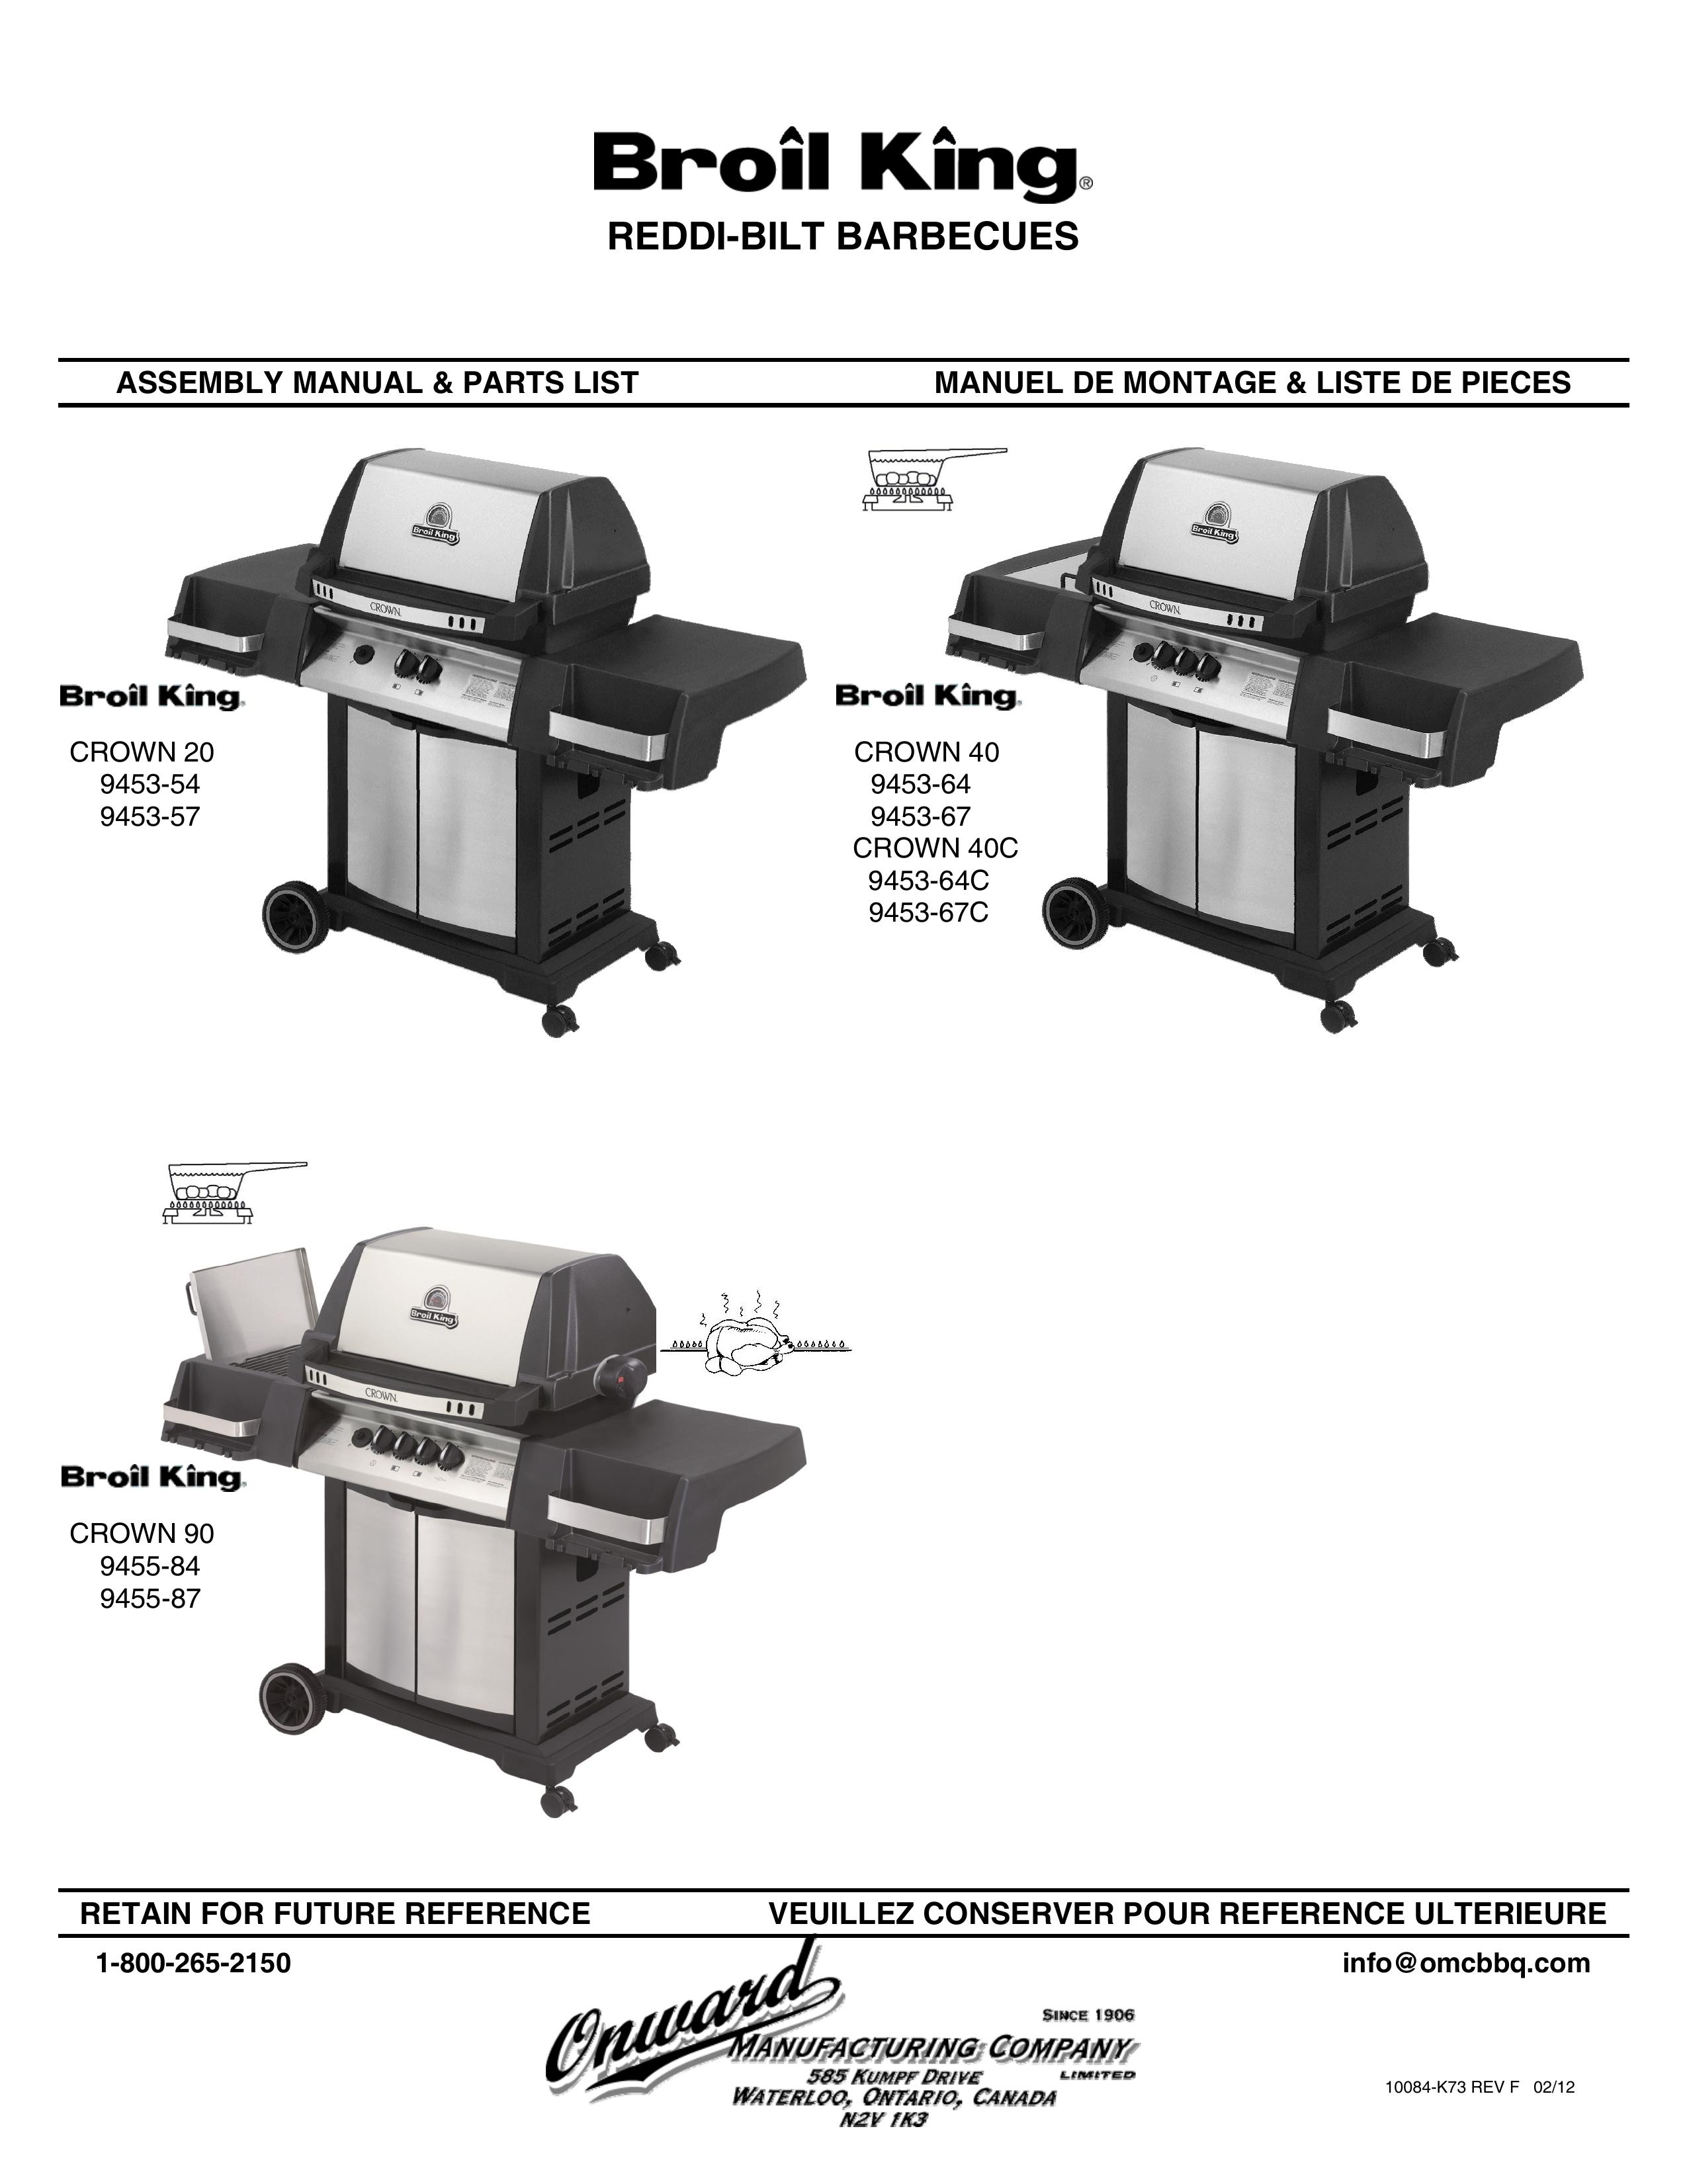 Broil King 9453-64C Electric Grill User Manual